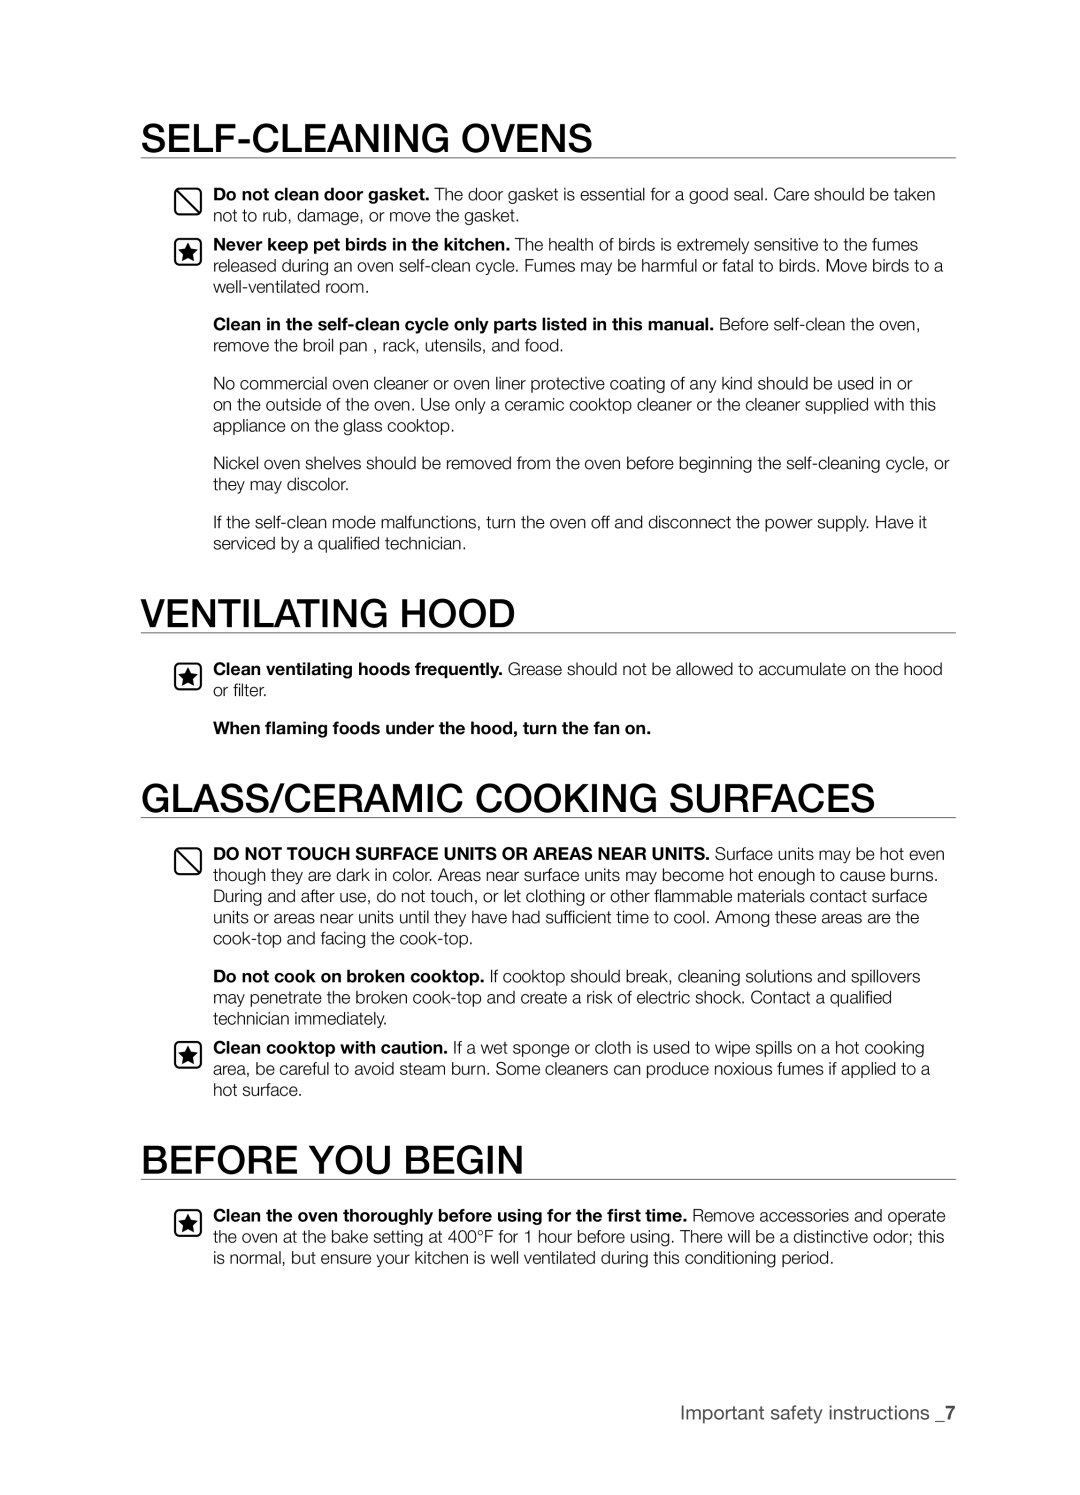 Samsung FTQ386LWUX user manual Self-Cleaning Ovens, Ventilating Hood, Glass/Ceramic Cooking Surfaces, Before you begin 